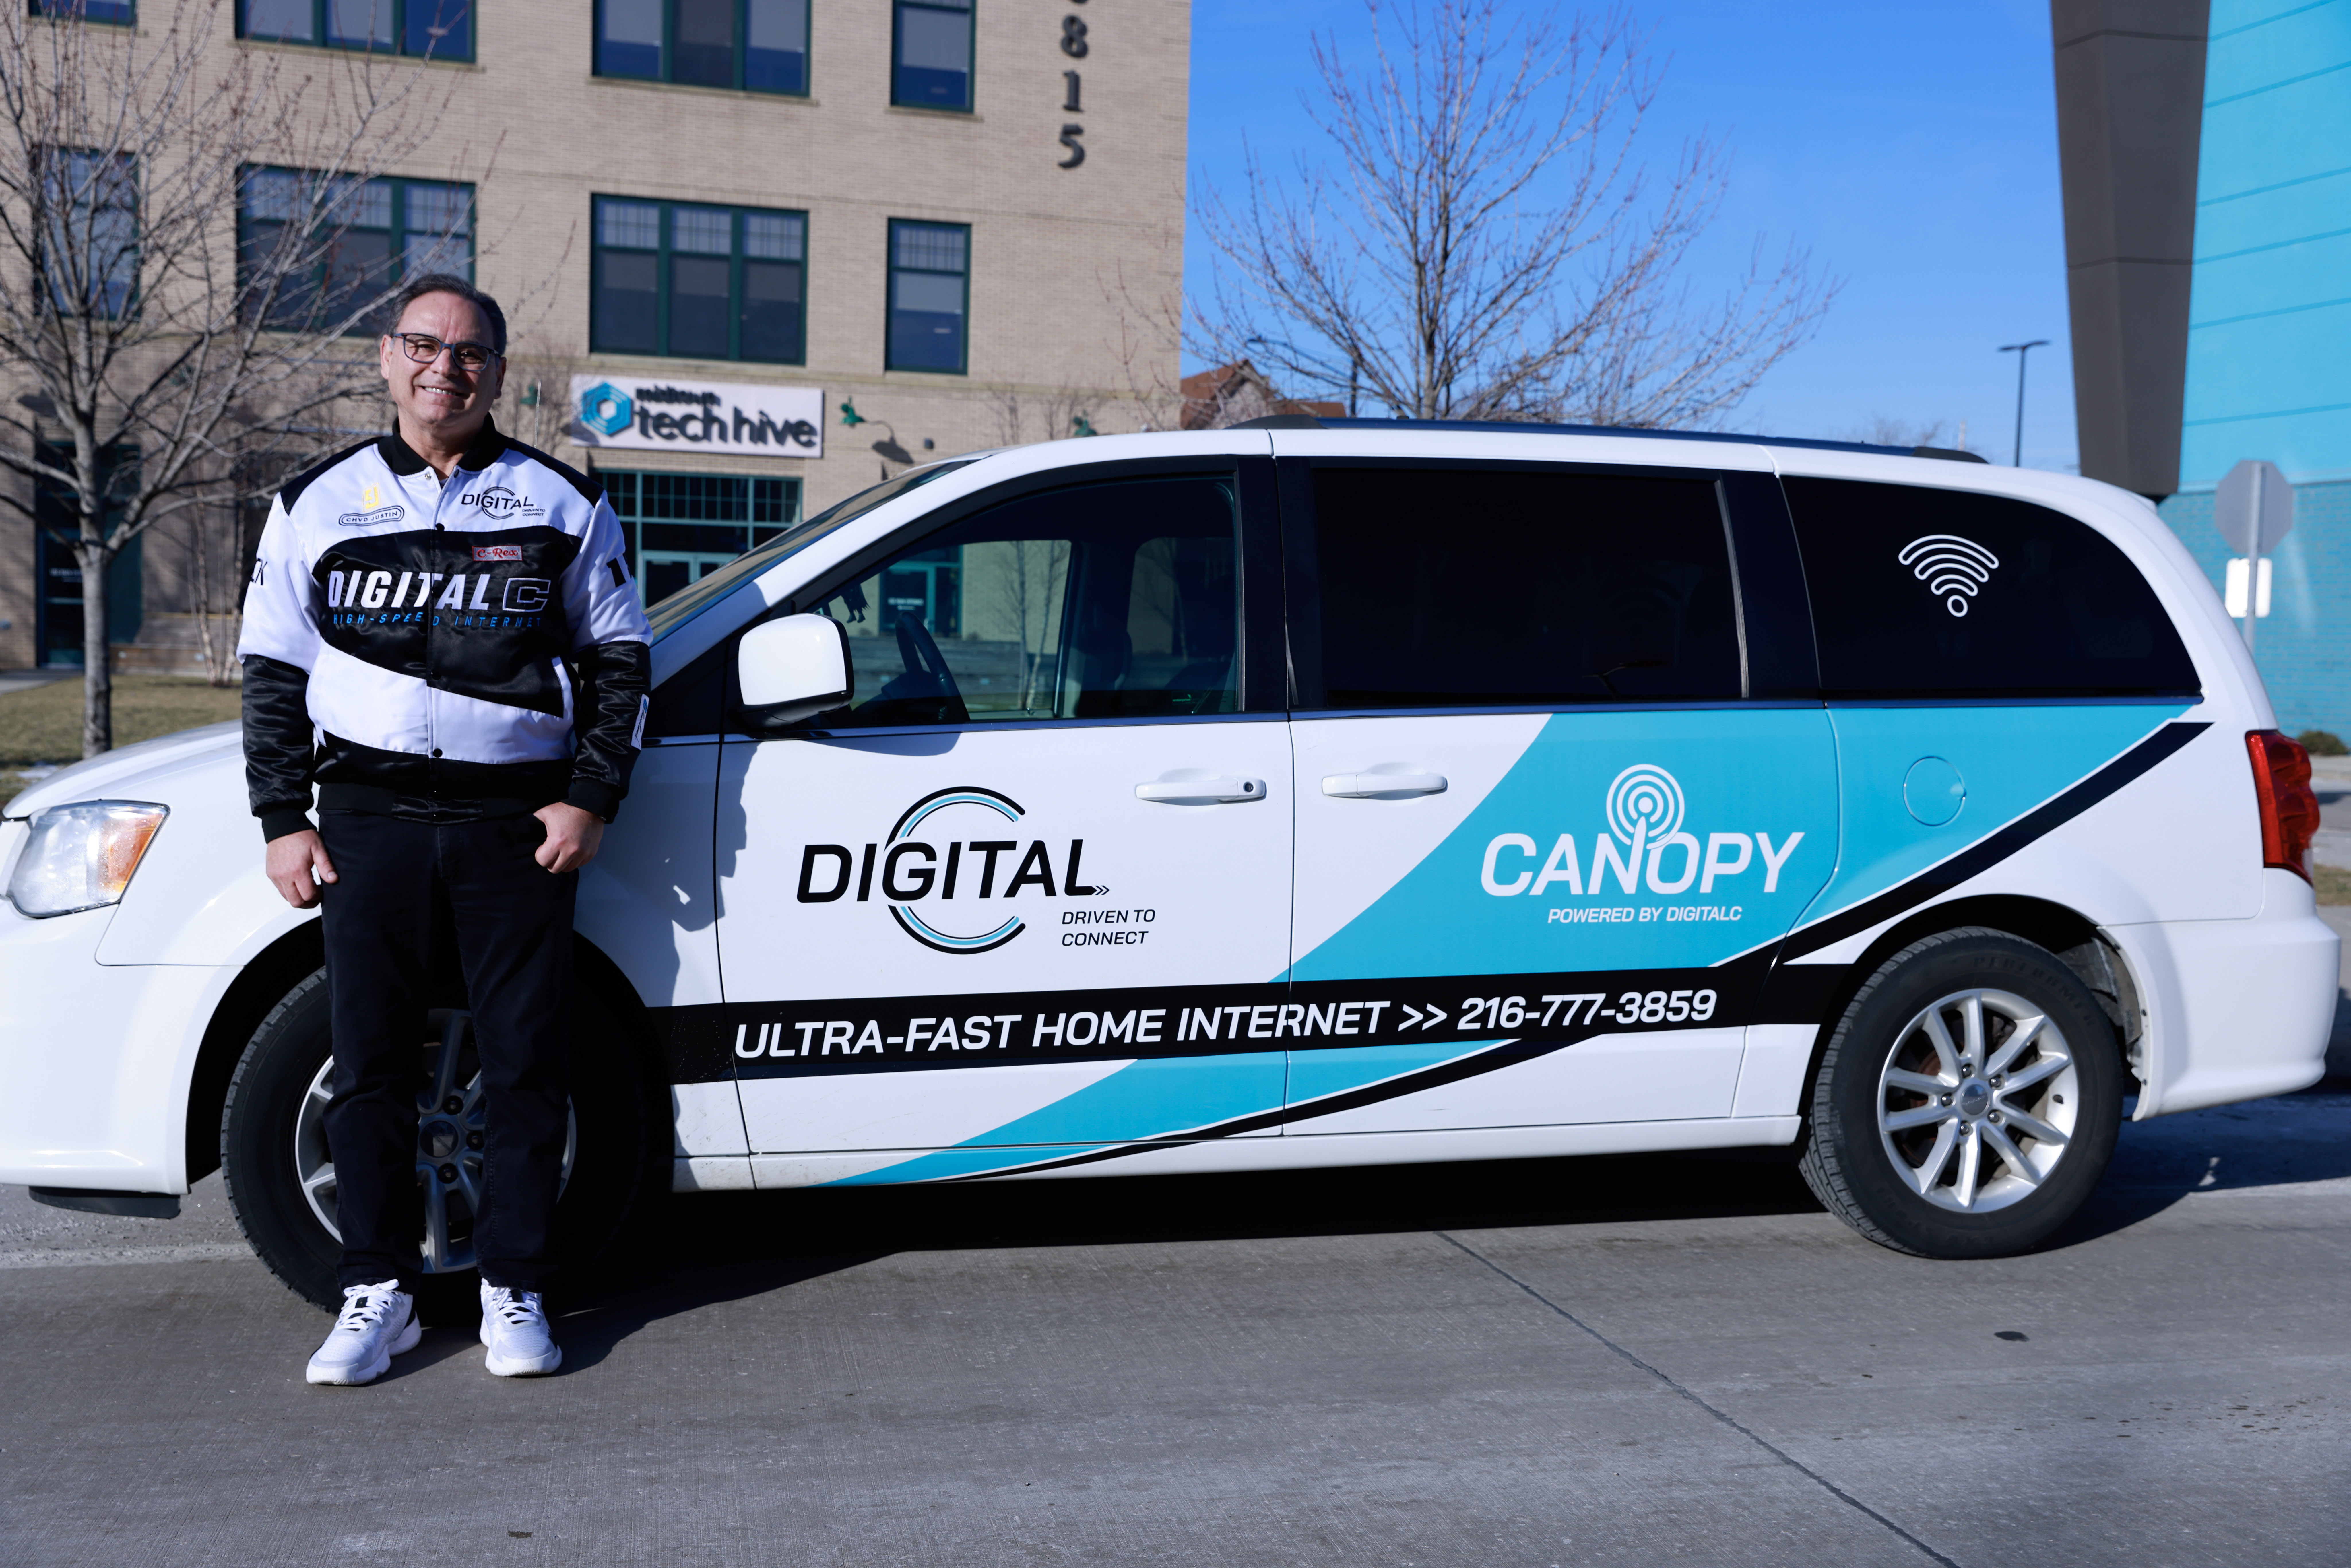 Man wearing a DigitalC bomber jacket stands in front of a van wrapped in DigitalC branding, parked outside the MidTown Tech Hive headquarters.